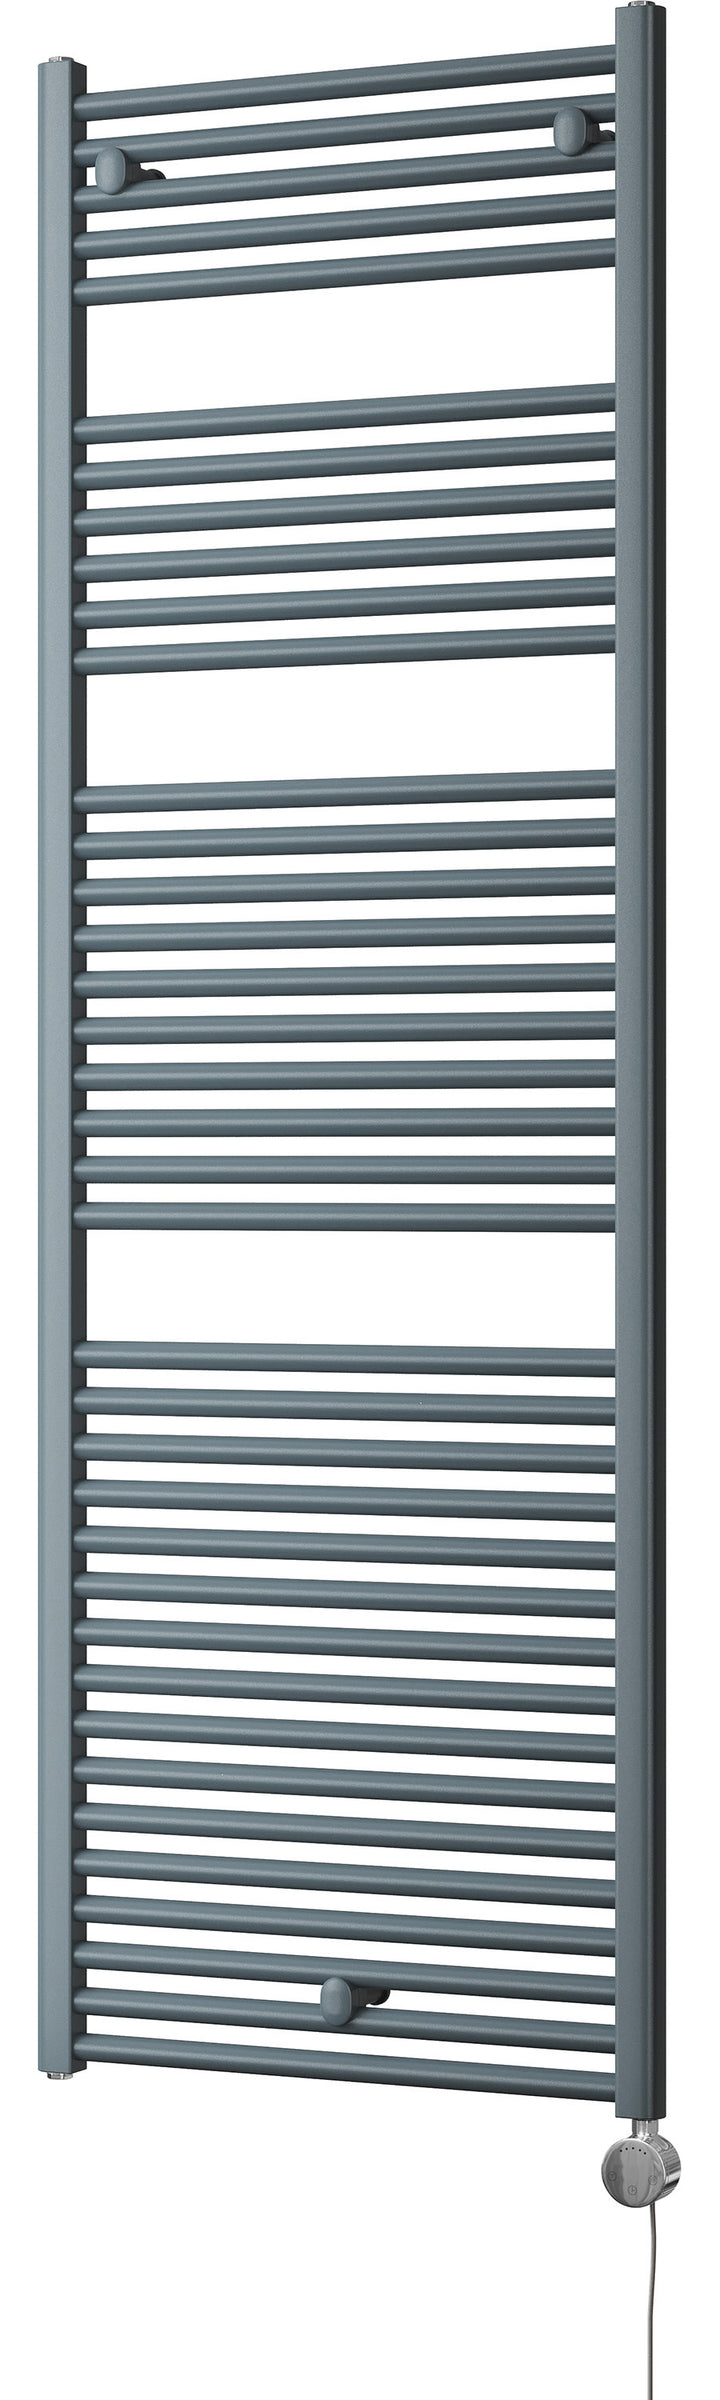 Roma - Anthracite Electric Towel Rail H1785mm x W600mm Straight 1000w Thermostatic